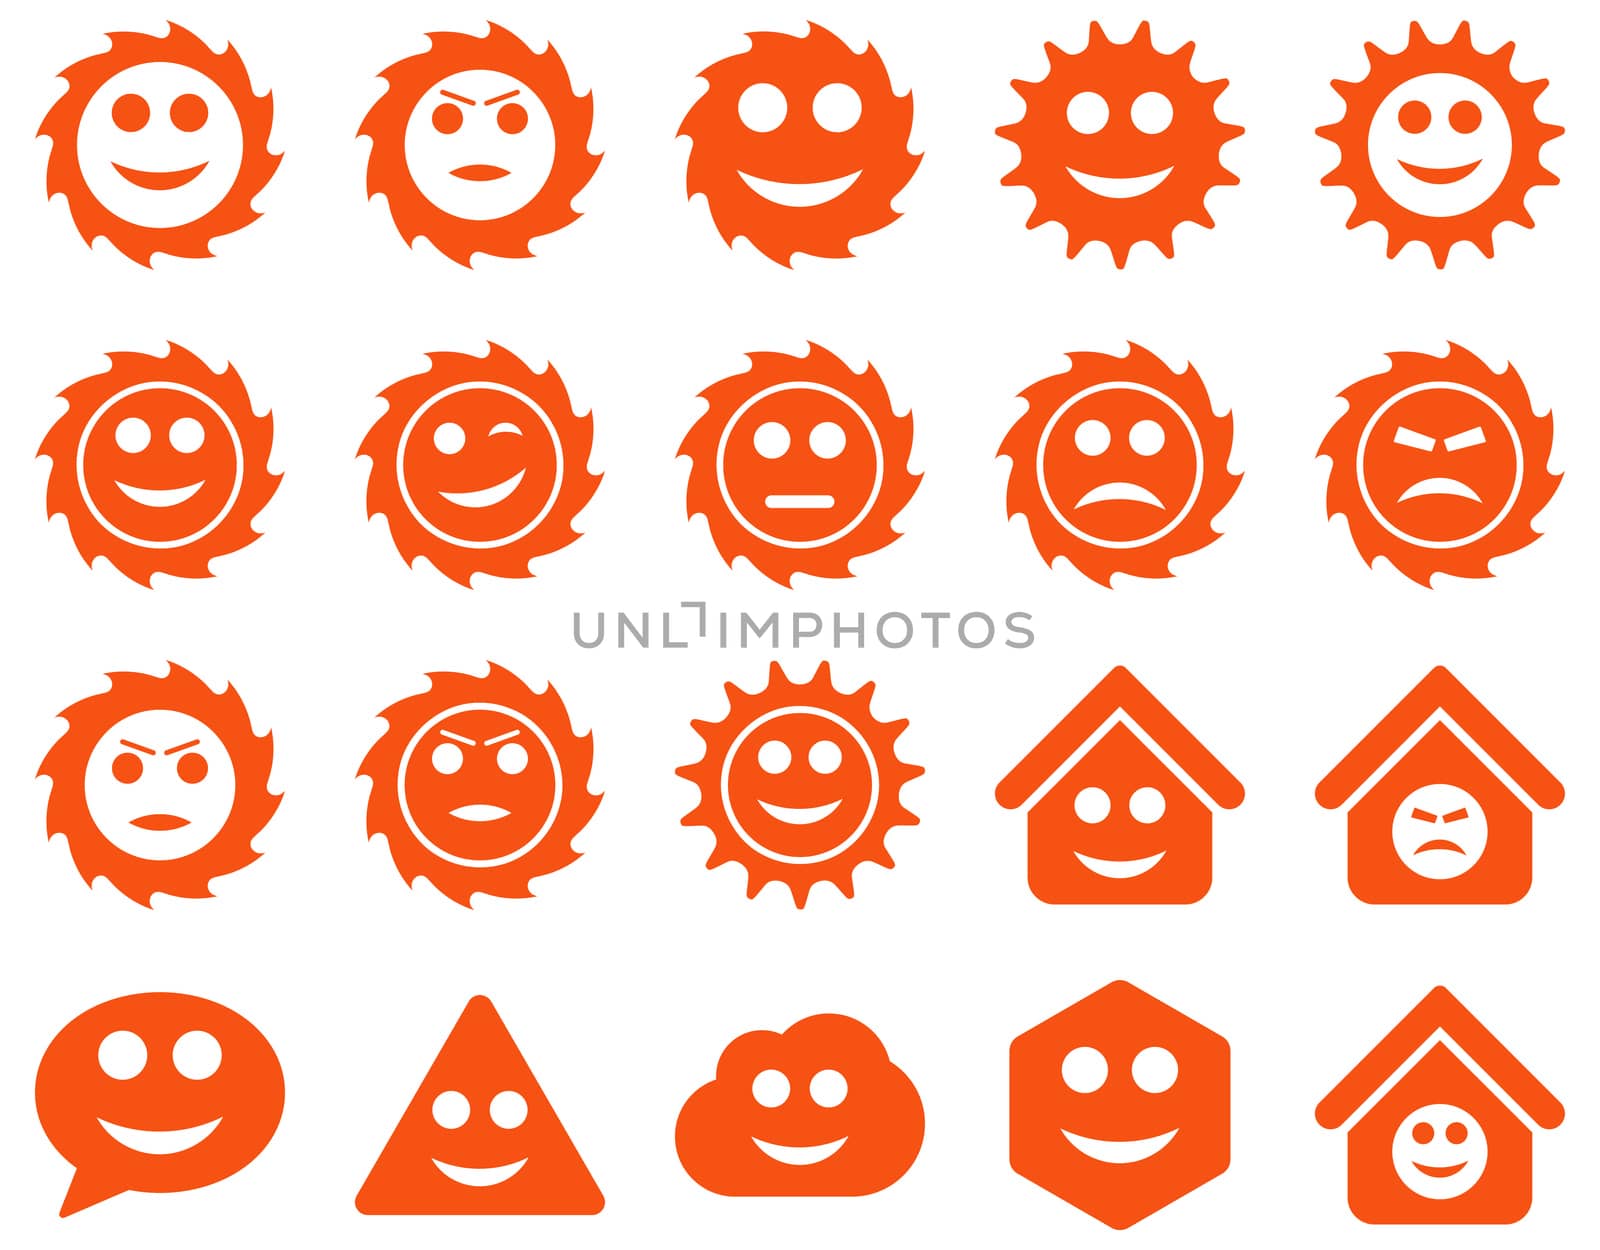 Tools, gears, smiles, emotions icons. Glyph set style is flat images, orange symbols, isolated on a white background.